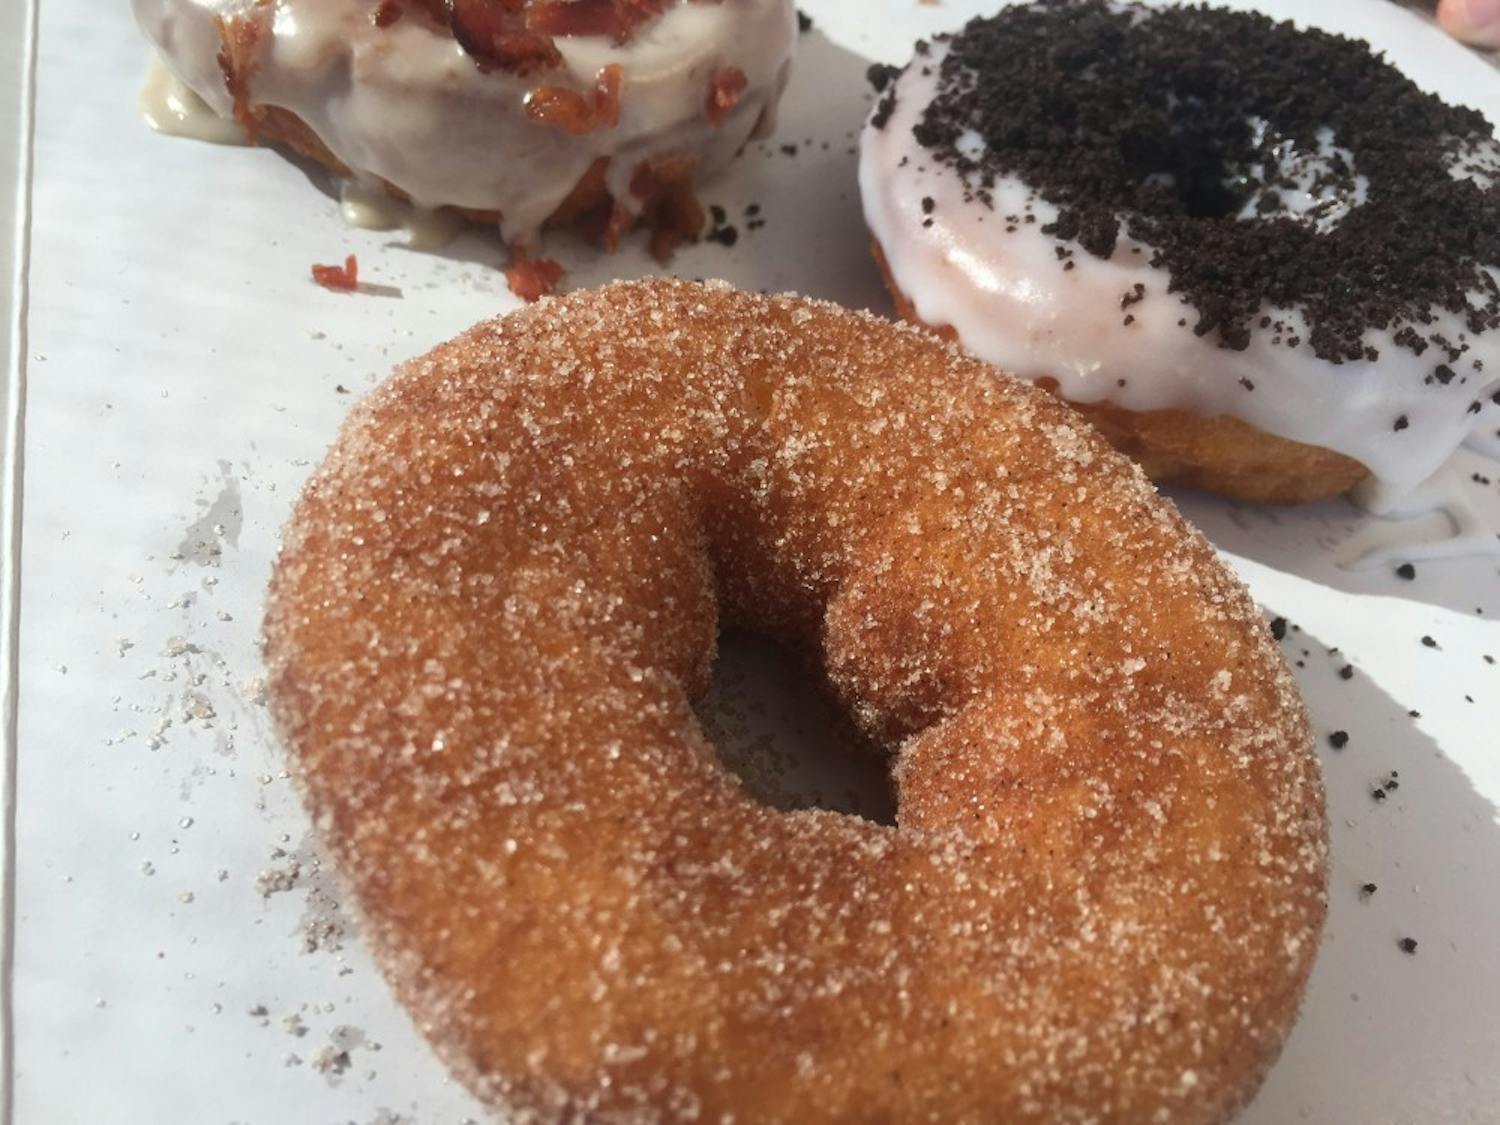 Duck Donuts provides timeless classics, unique new flavors and customizable options.